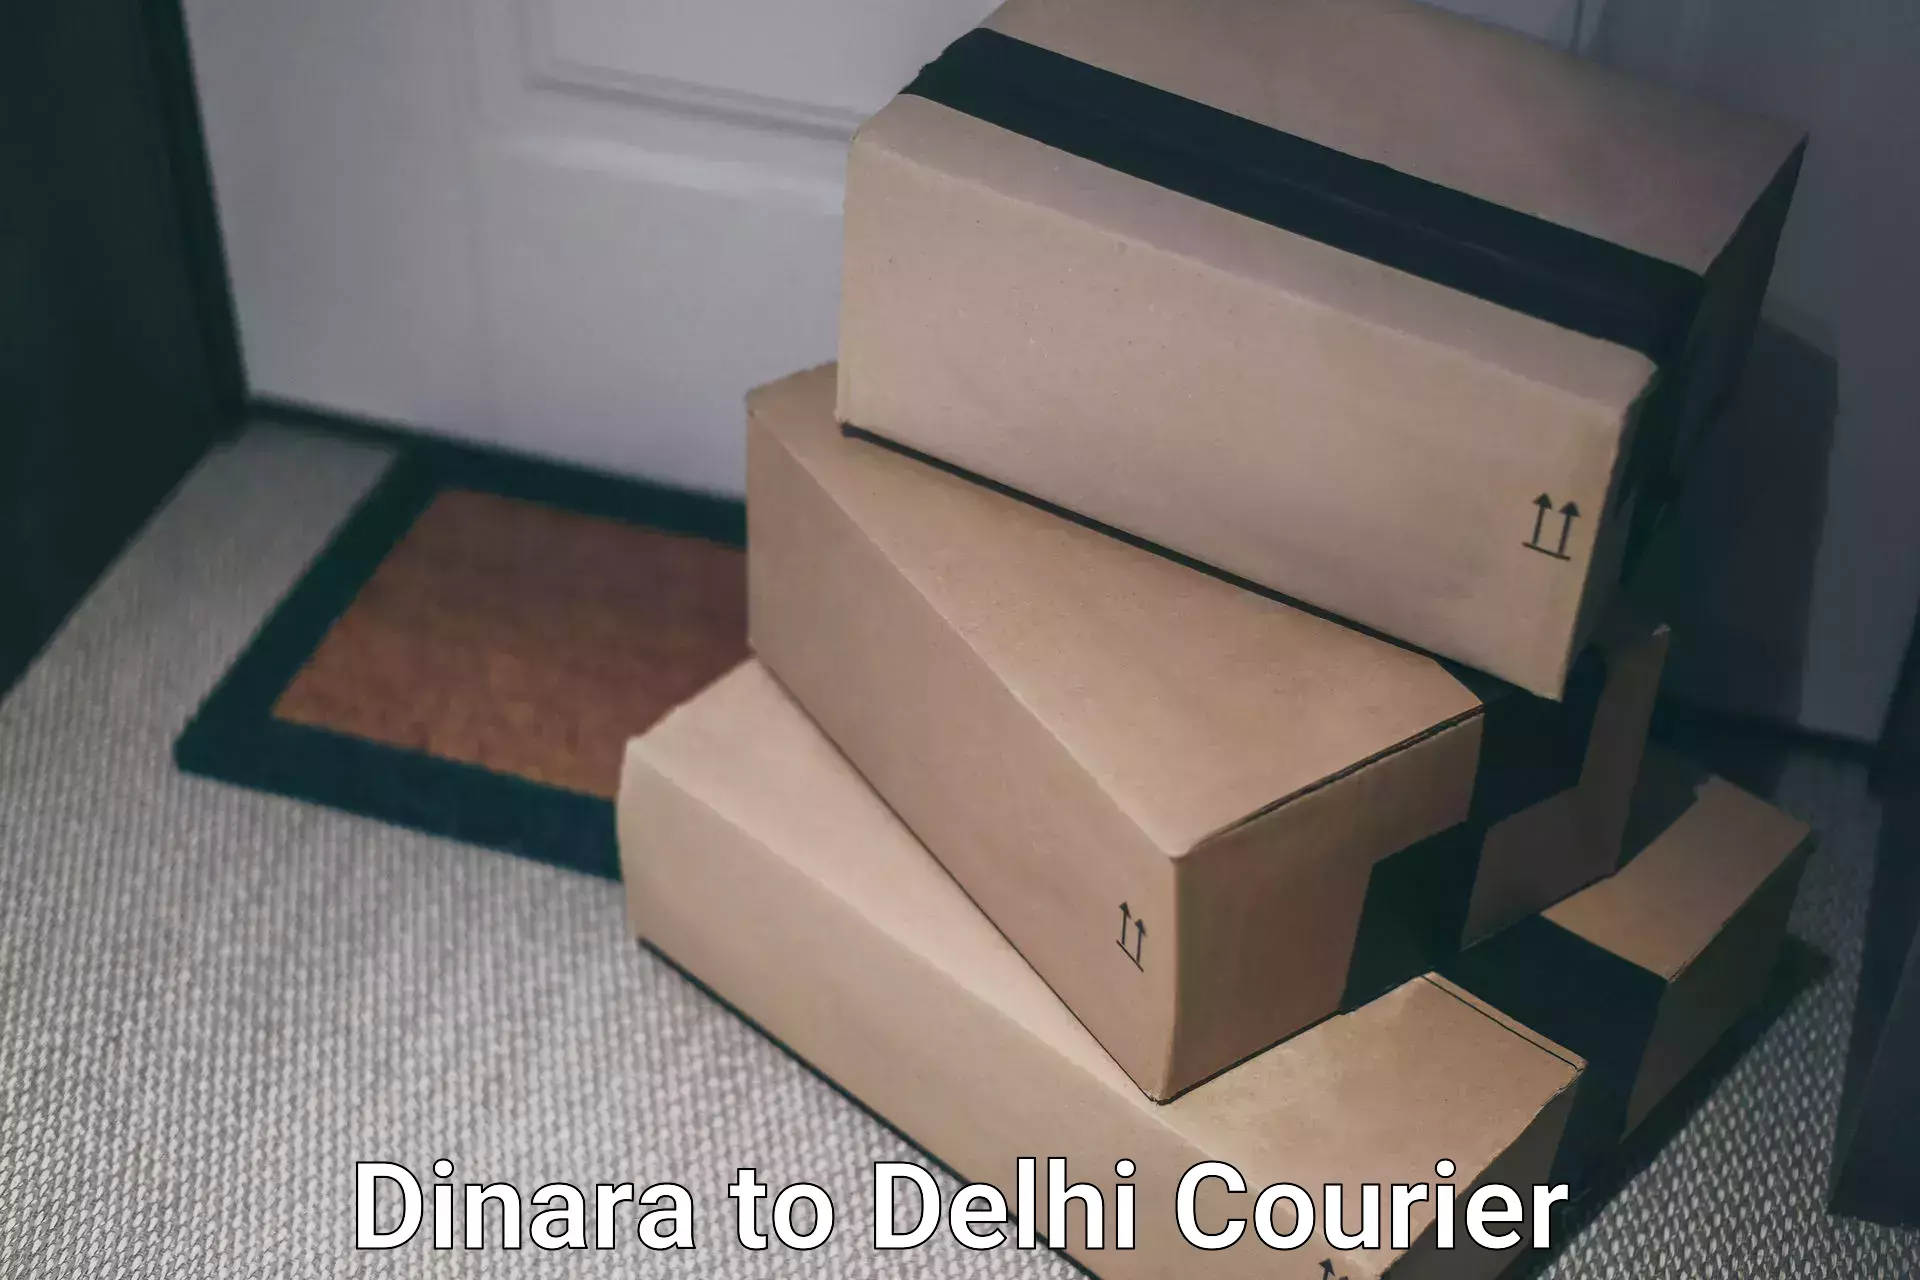 Same-day delivery options Dinara to Lodhi Road